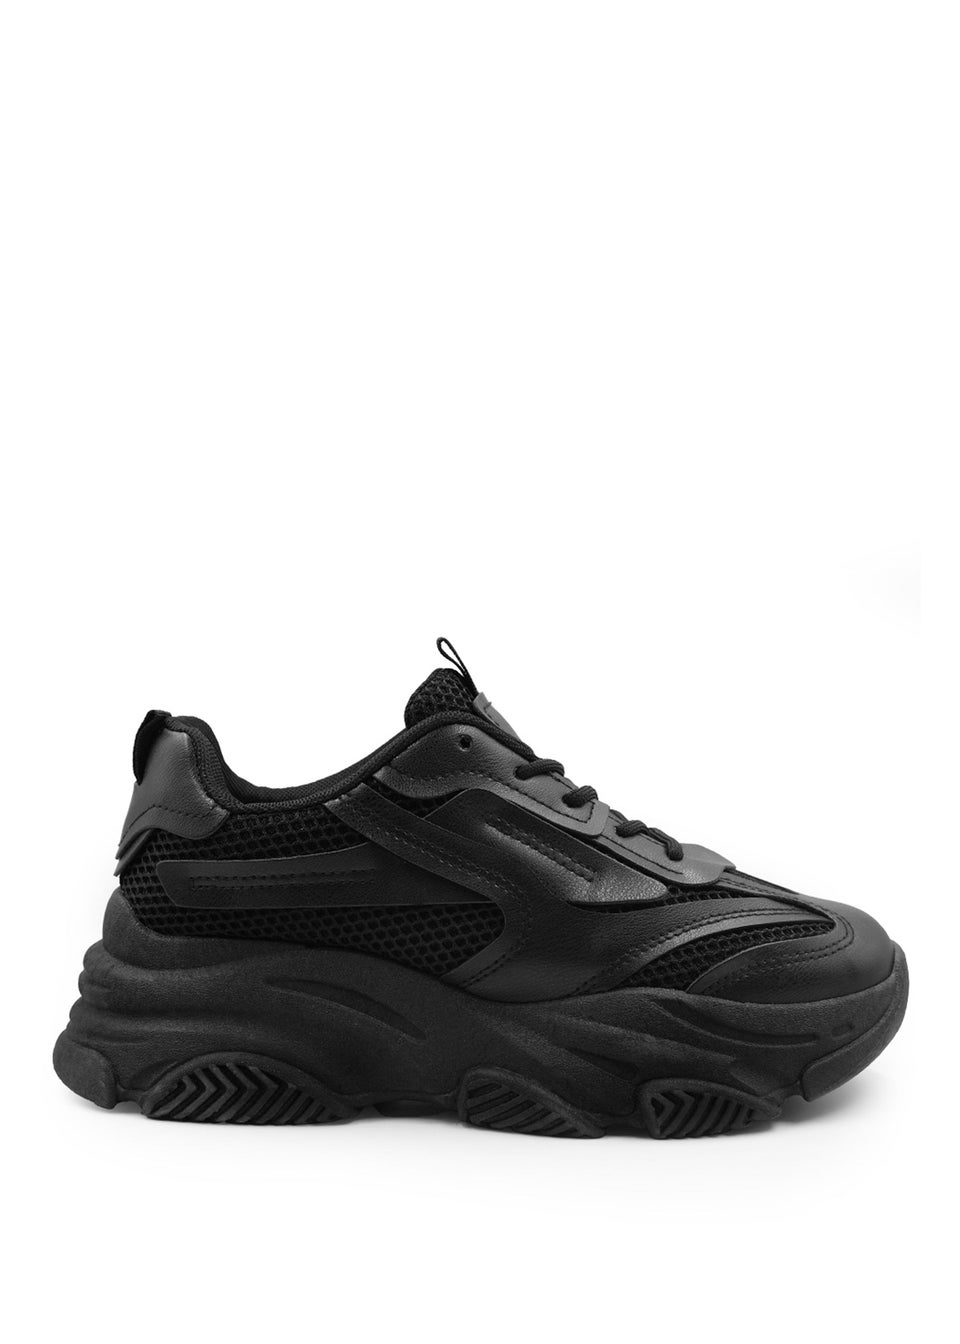 Where's That From Downtown Black Pu Chunky Sole Trainers